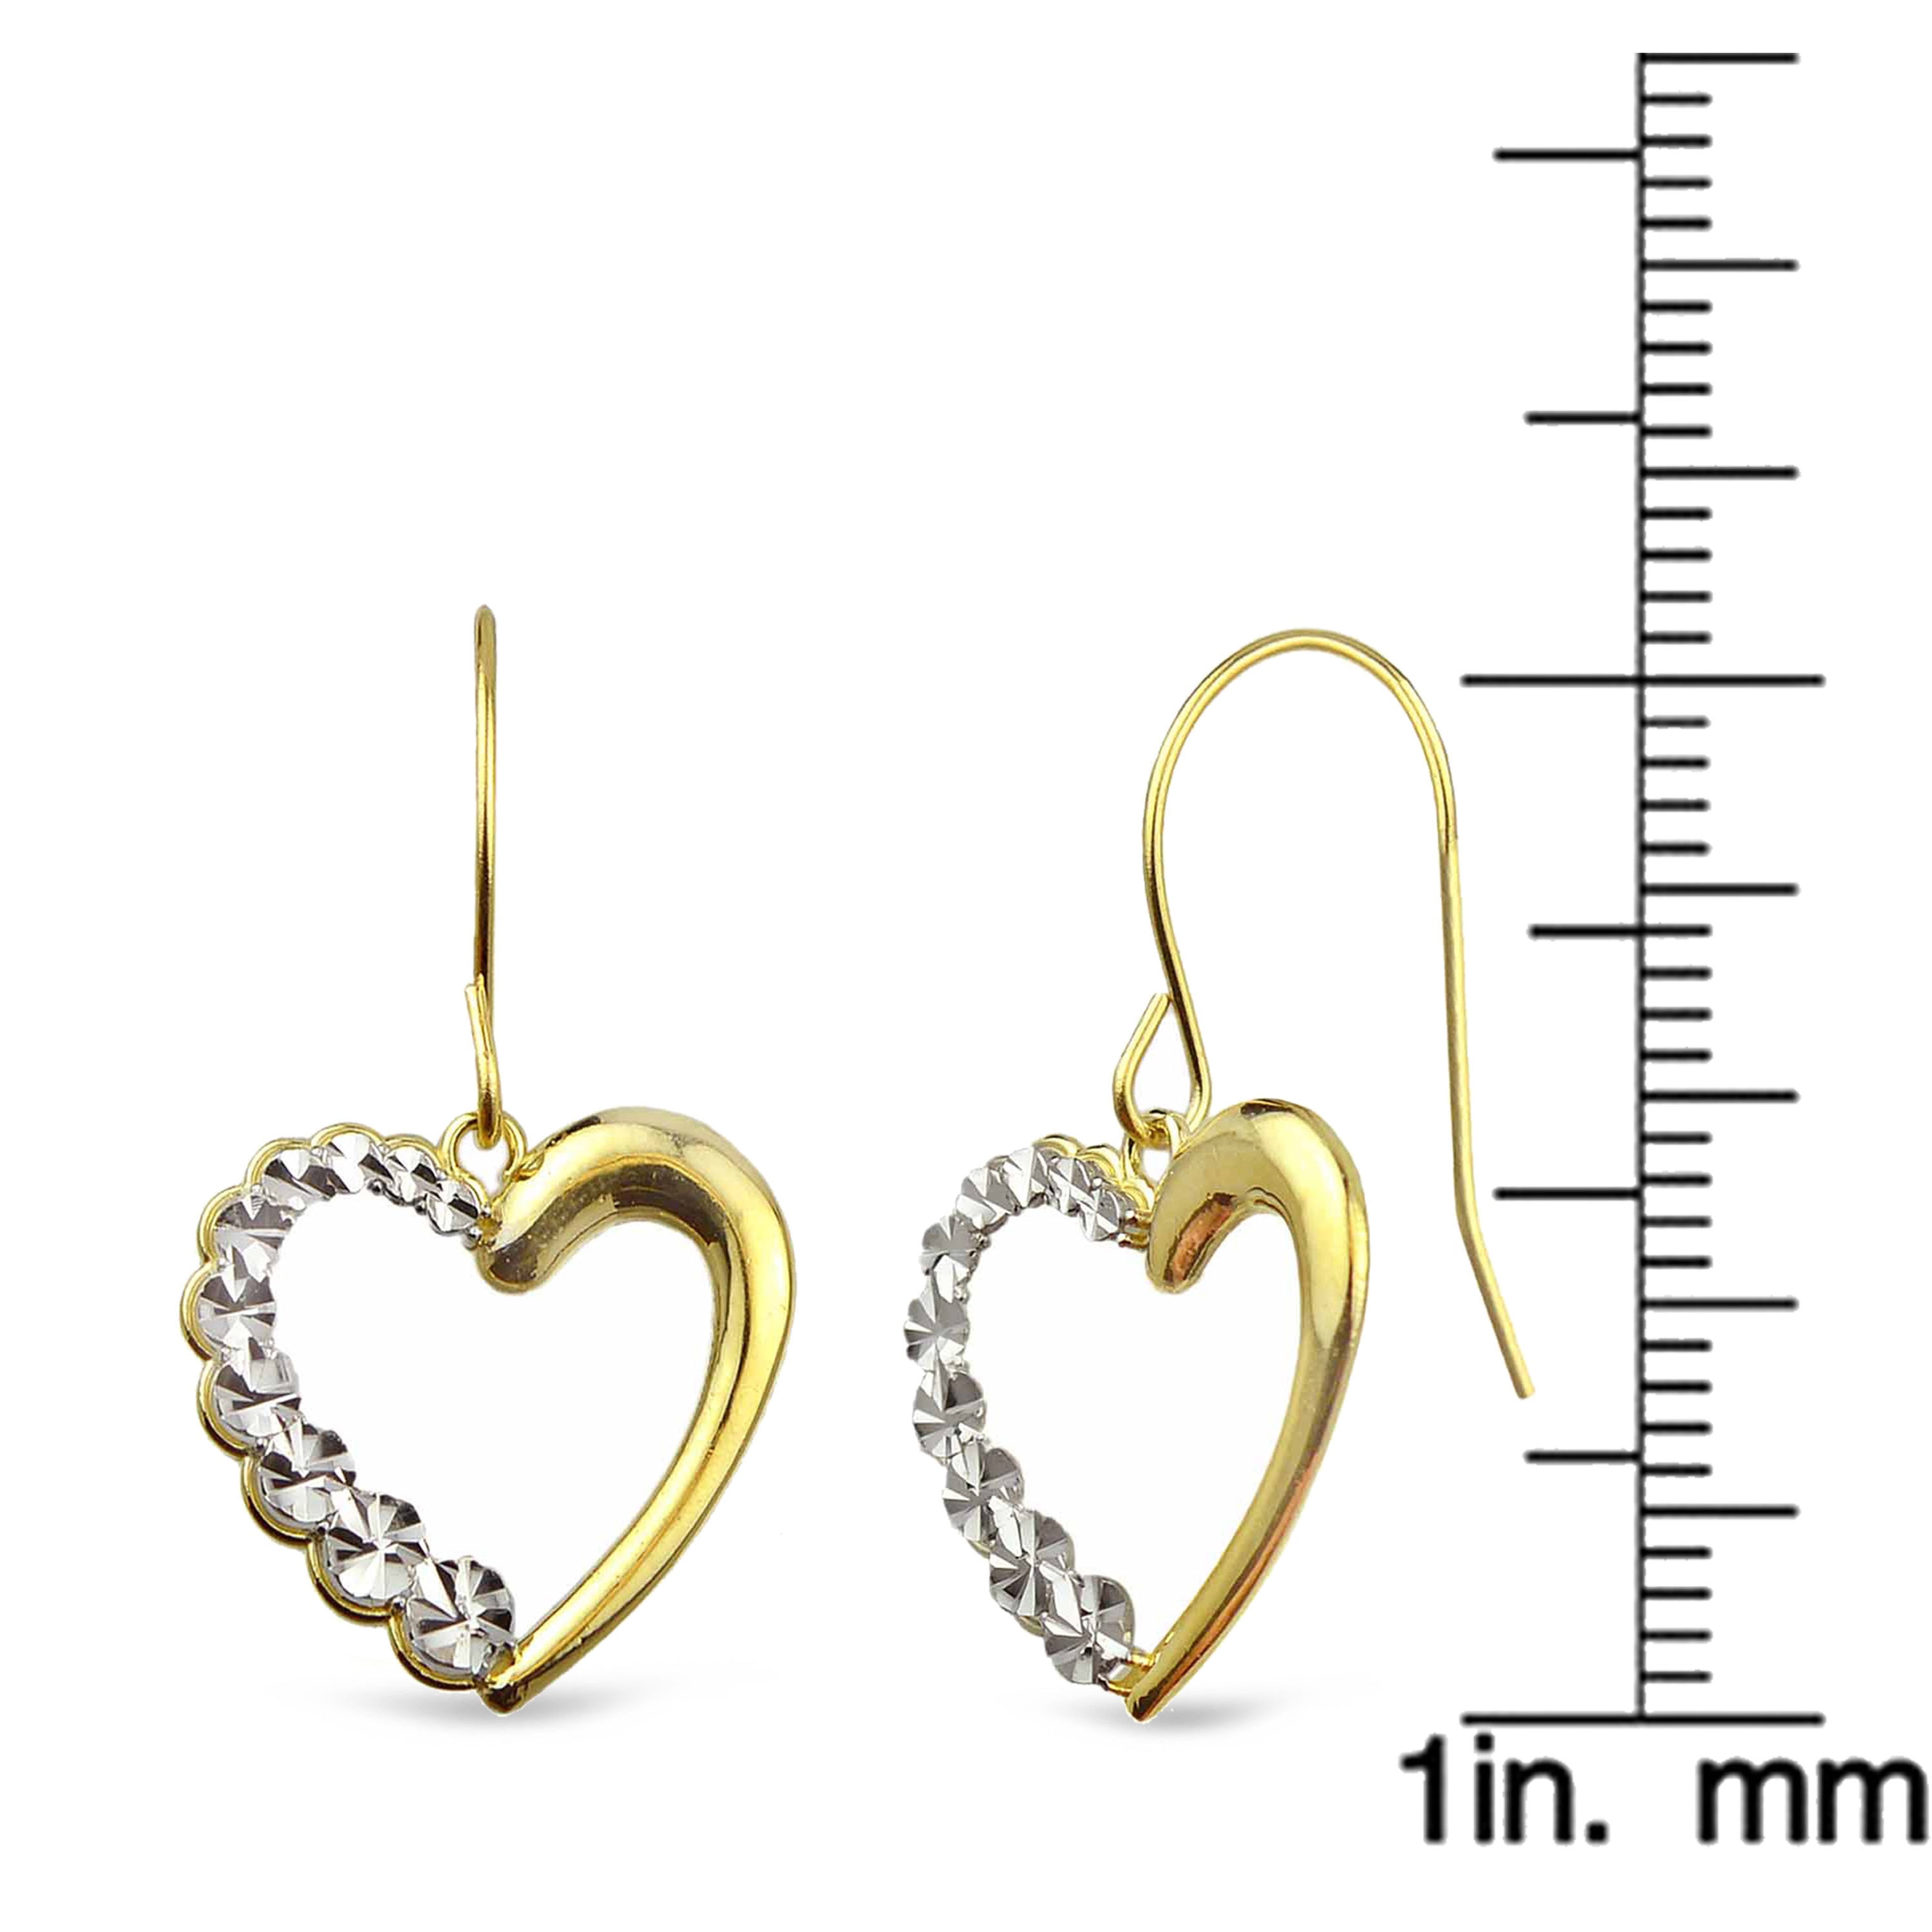 Handcrafted 10kt Yellow Gold Diamond-Cut Heart Dangle Earrings - image 3 of 3